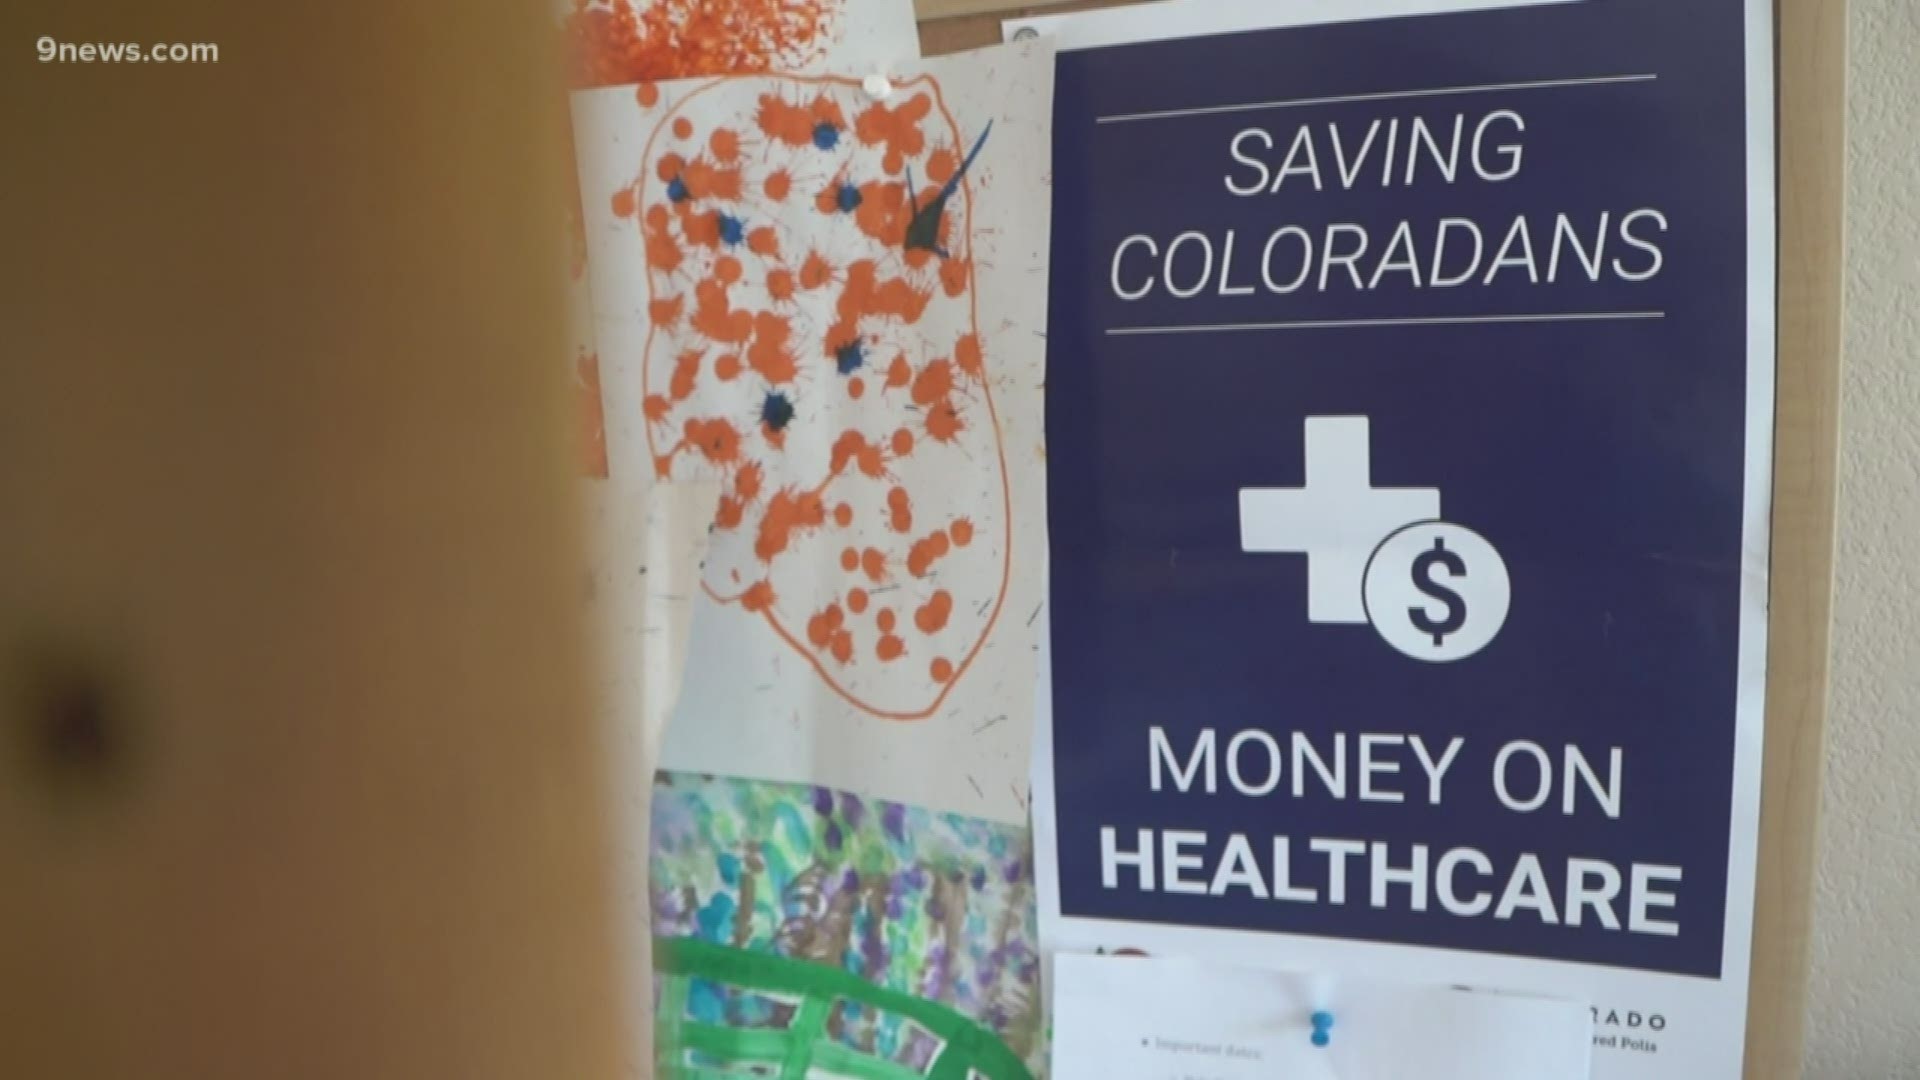 The Peak Health Alliance was created with the goal of reducing premiums for folks living in Summit County by as much as 20 percent.